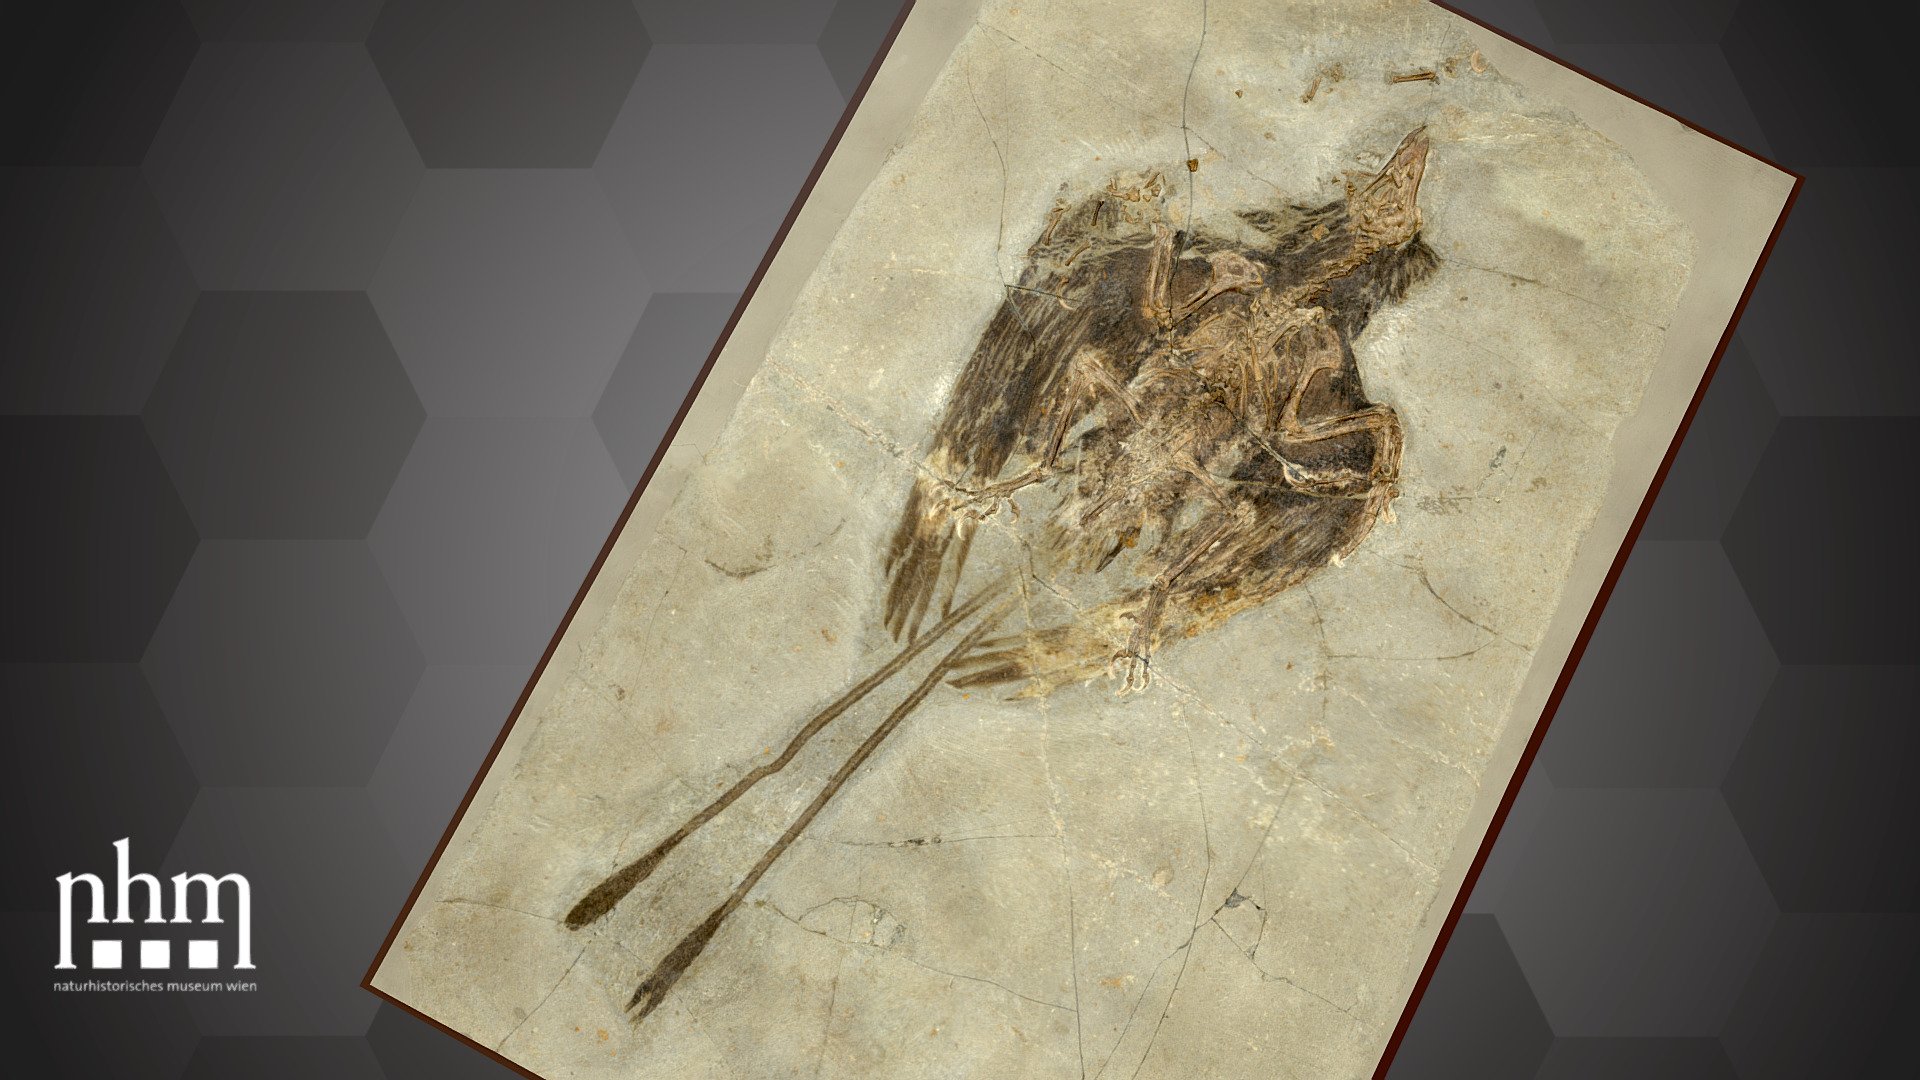 3D scan of a fossilized primitive bird, the extinct Confuciusornis sanctus dated 125 million years ago and found in the Liaoning province, China. The lagerstätte in China is an El Dorado for paleontologists and evolutionary biologists: more than 1000 specimens of Confuciusornis were found there. These findings provide valuable information on the evolution of birds.

Confuciusornis sanctus is Number 21 of the NHM Top 100 and can be found in Hall 8 of the NHM Vienna. 

Specimen: Confuciusornis sanctus (Hou et al. 1995) 

Inventory number: NHMW-Geo 1997z0112/0001

Collection: NHM Vienna, Geology &amp; Paleontology Dept., Vertebrate Coll. (curator: Ursula Göhlich)

Find out more about the NHMW here.

Scanned and edited by Nikola Brodtmann, Anna Haider &amp; Viola Winkler (NHMW)

The frame around the fossil was added digitally.

Scanner: Artec Space Spider. Infrastructure funded by the FFG.

3D printable model available via download of  &ldquo;Additional File